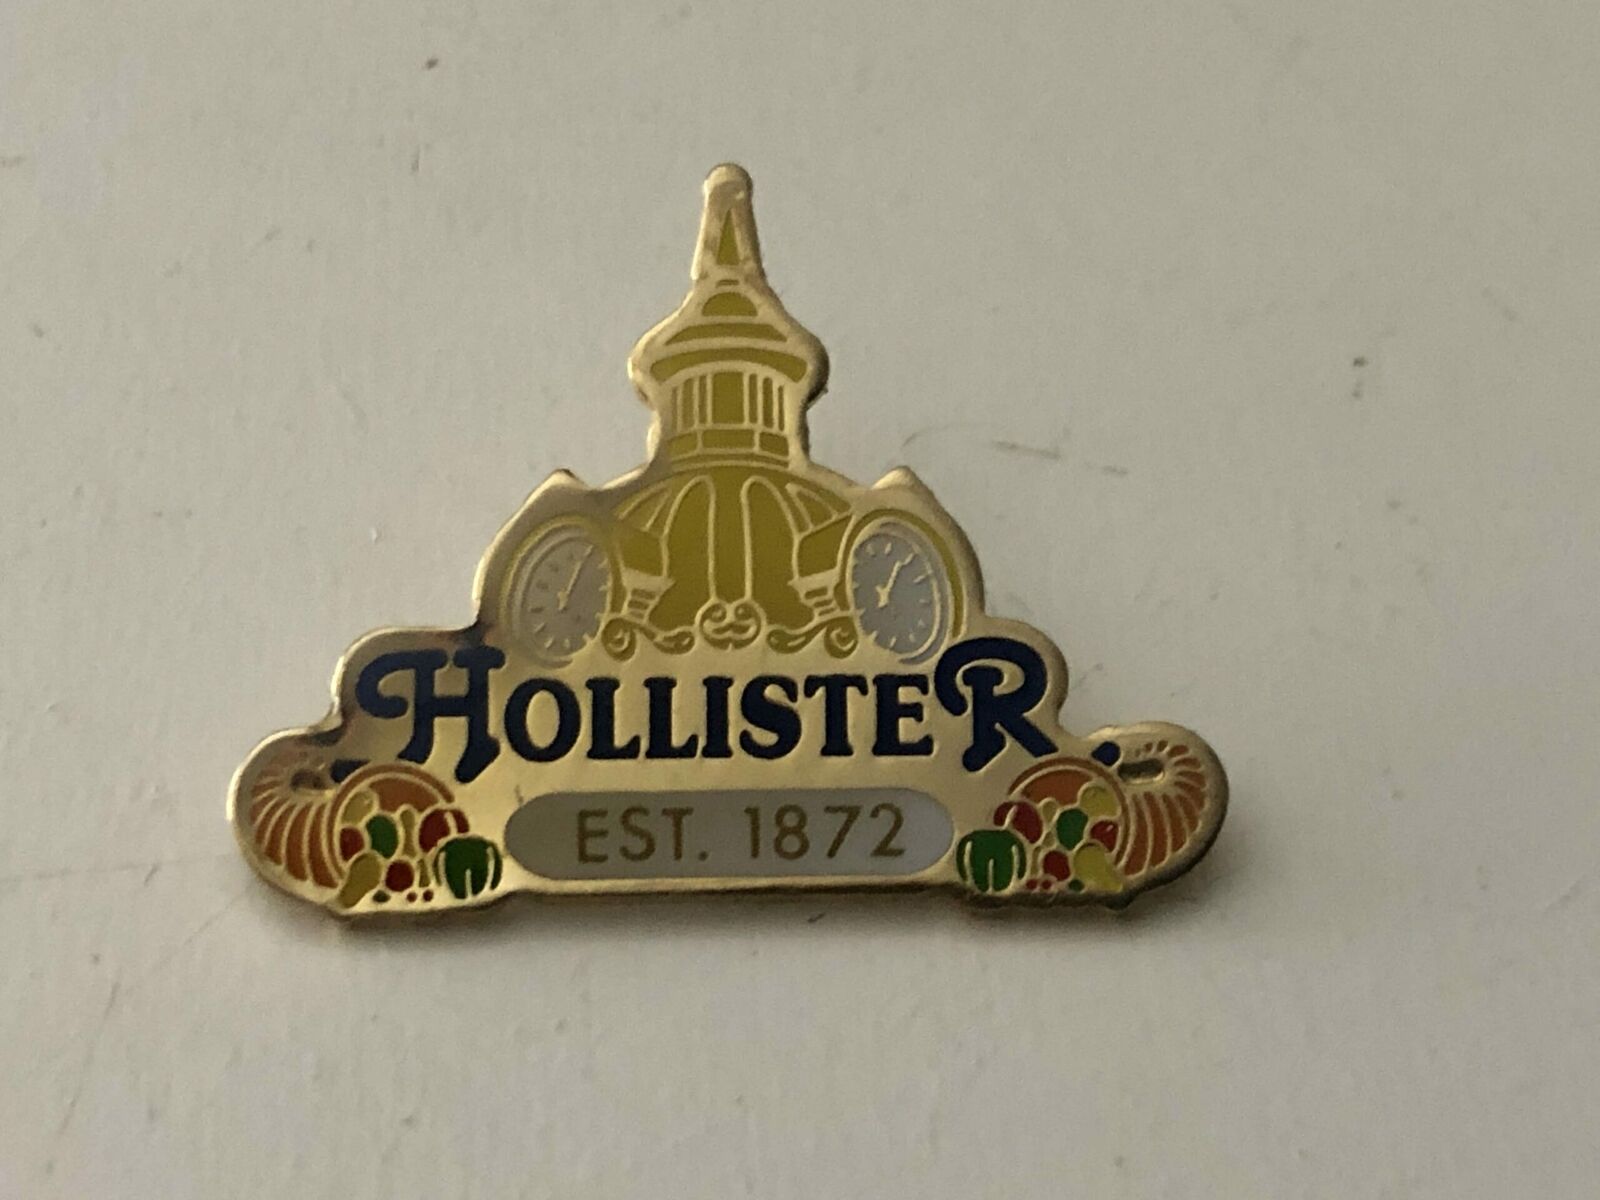 HOLLISTER EST. 1872 LAPEL PIN STATE CITY COUNTY PIN BUTTON TIE TACK USA